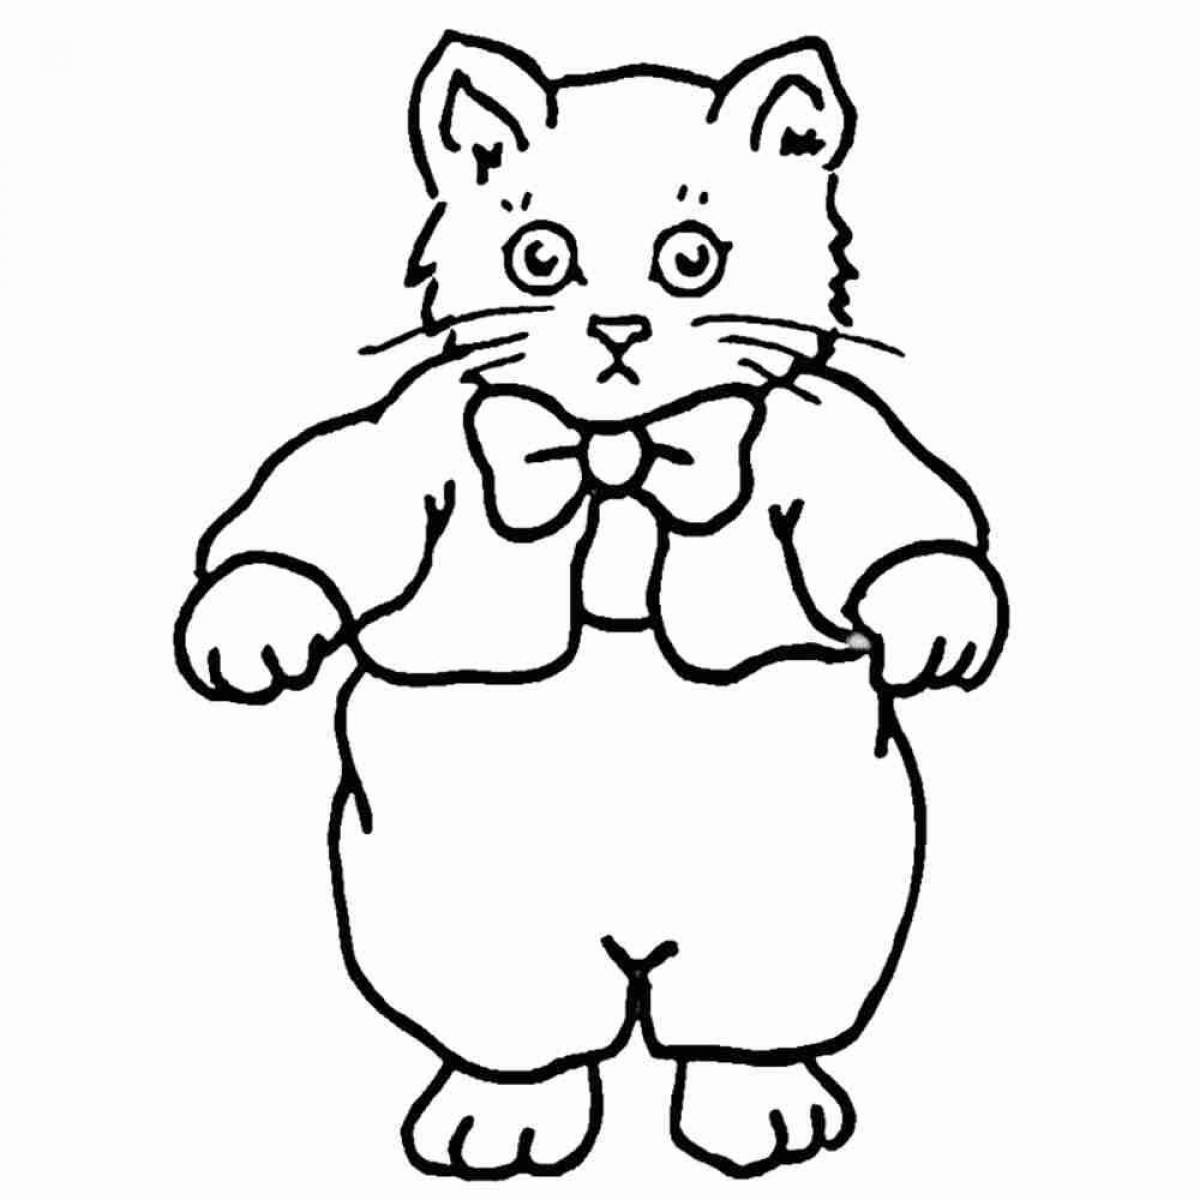 Coloring page exquisite bass cat